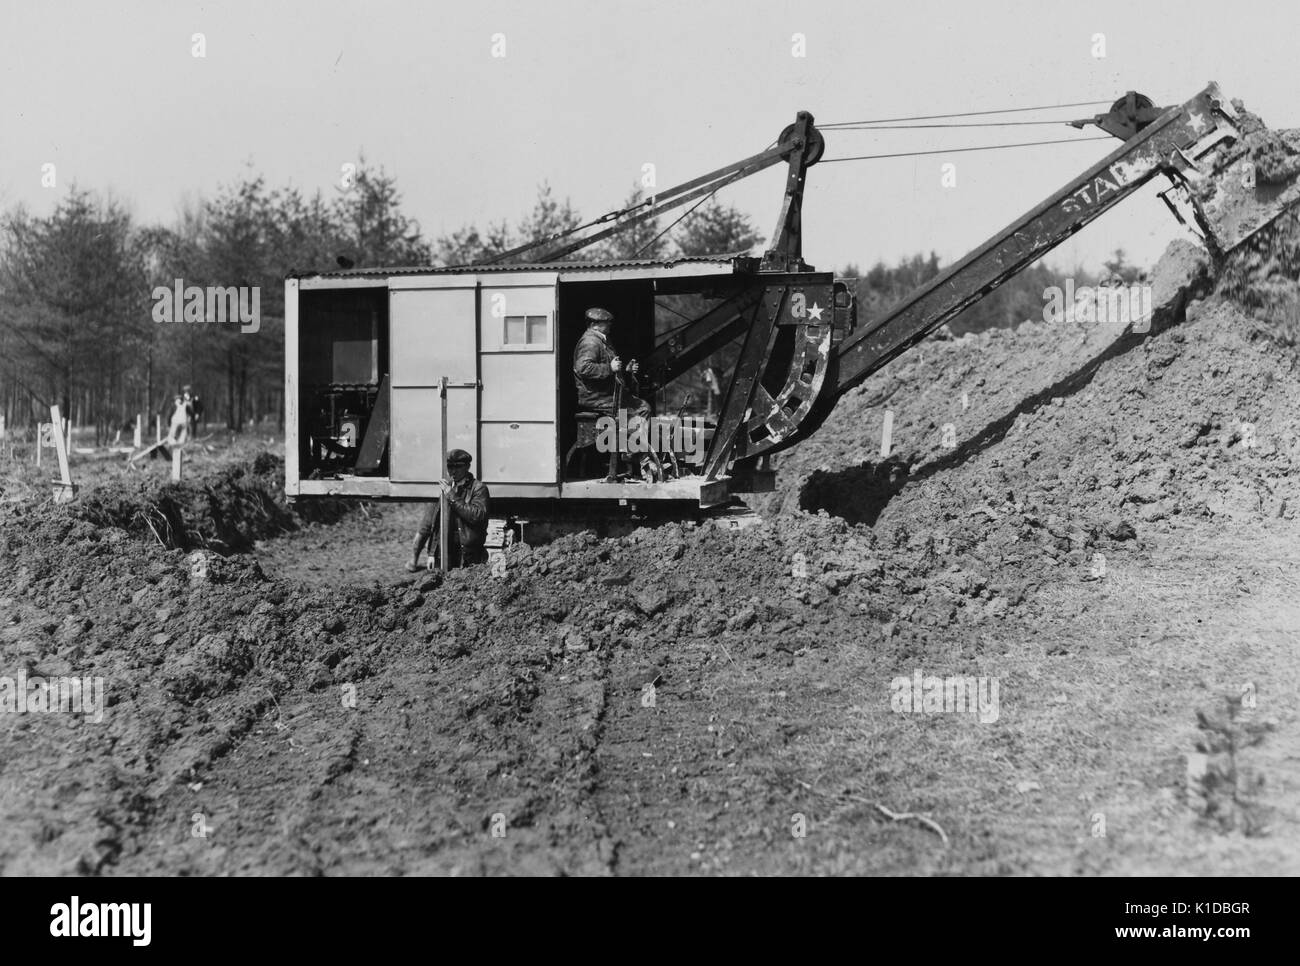 Mechanical digger working on cellar foundation at a Farm Security Administration housing unit at the Berwyn project, Greenbelt, Maryland, 1936. From the New York Public Library. Stock Photo